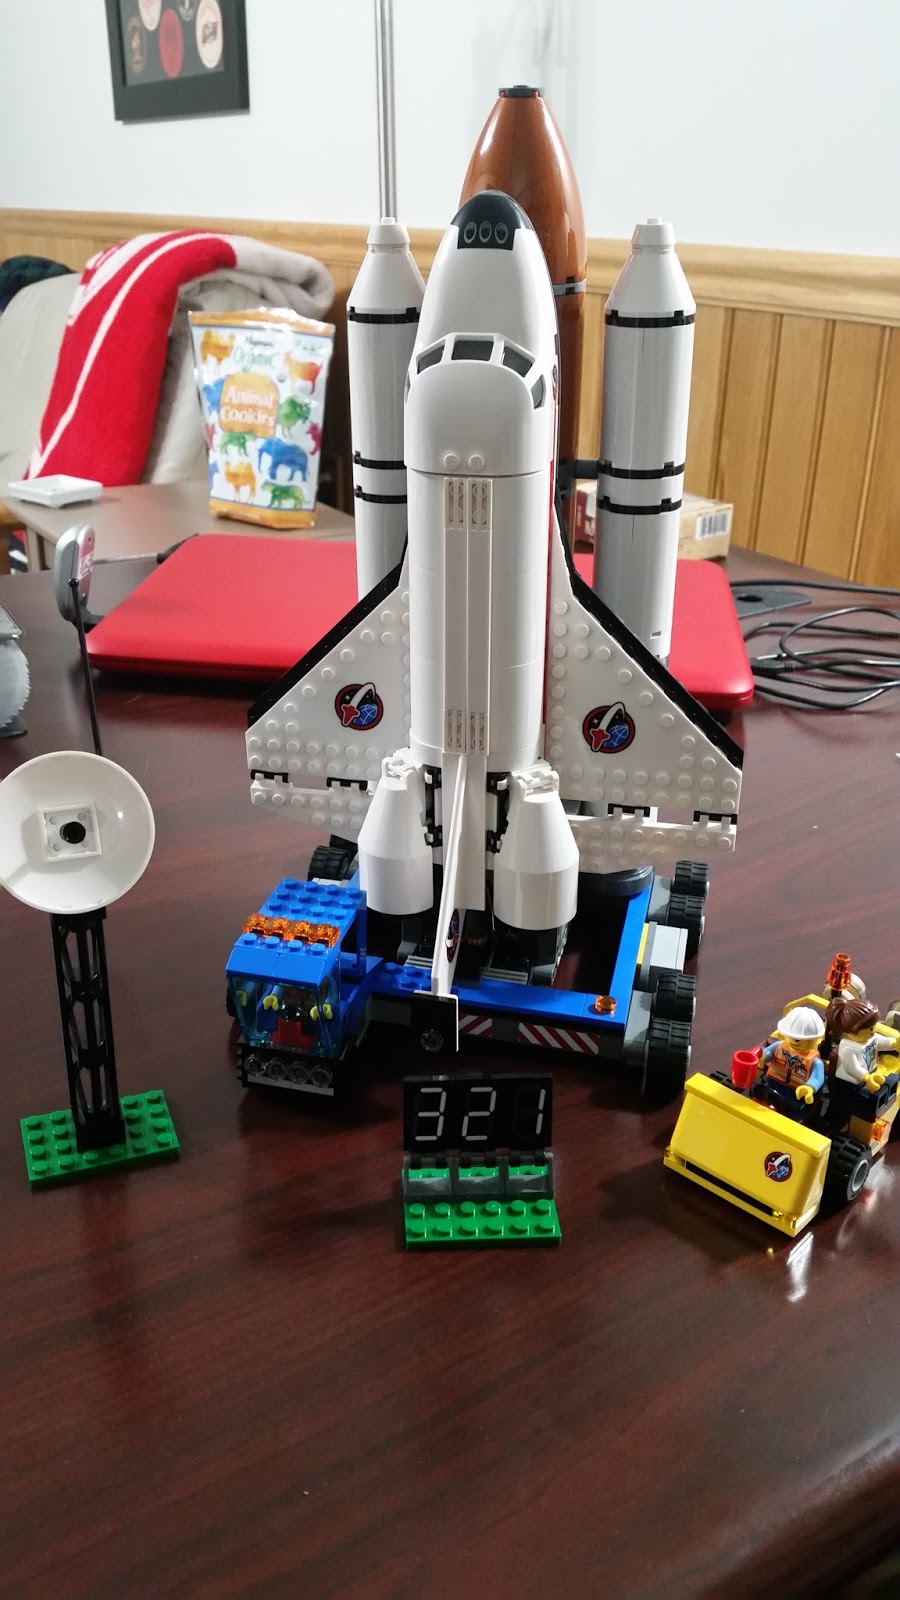 historie nøje feudale REVIEW: LEGO 60080 - Spaceport